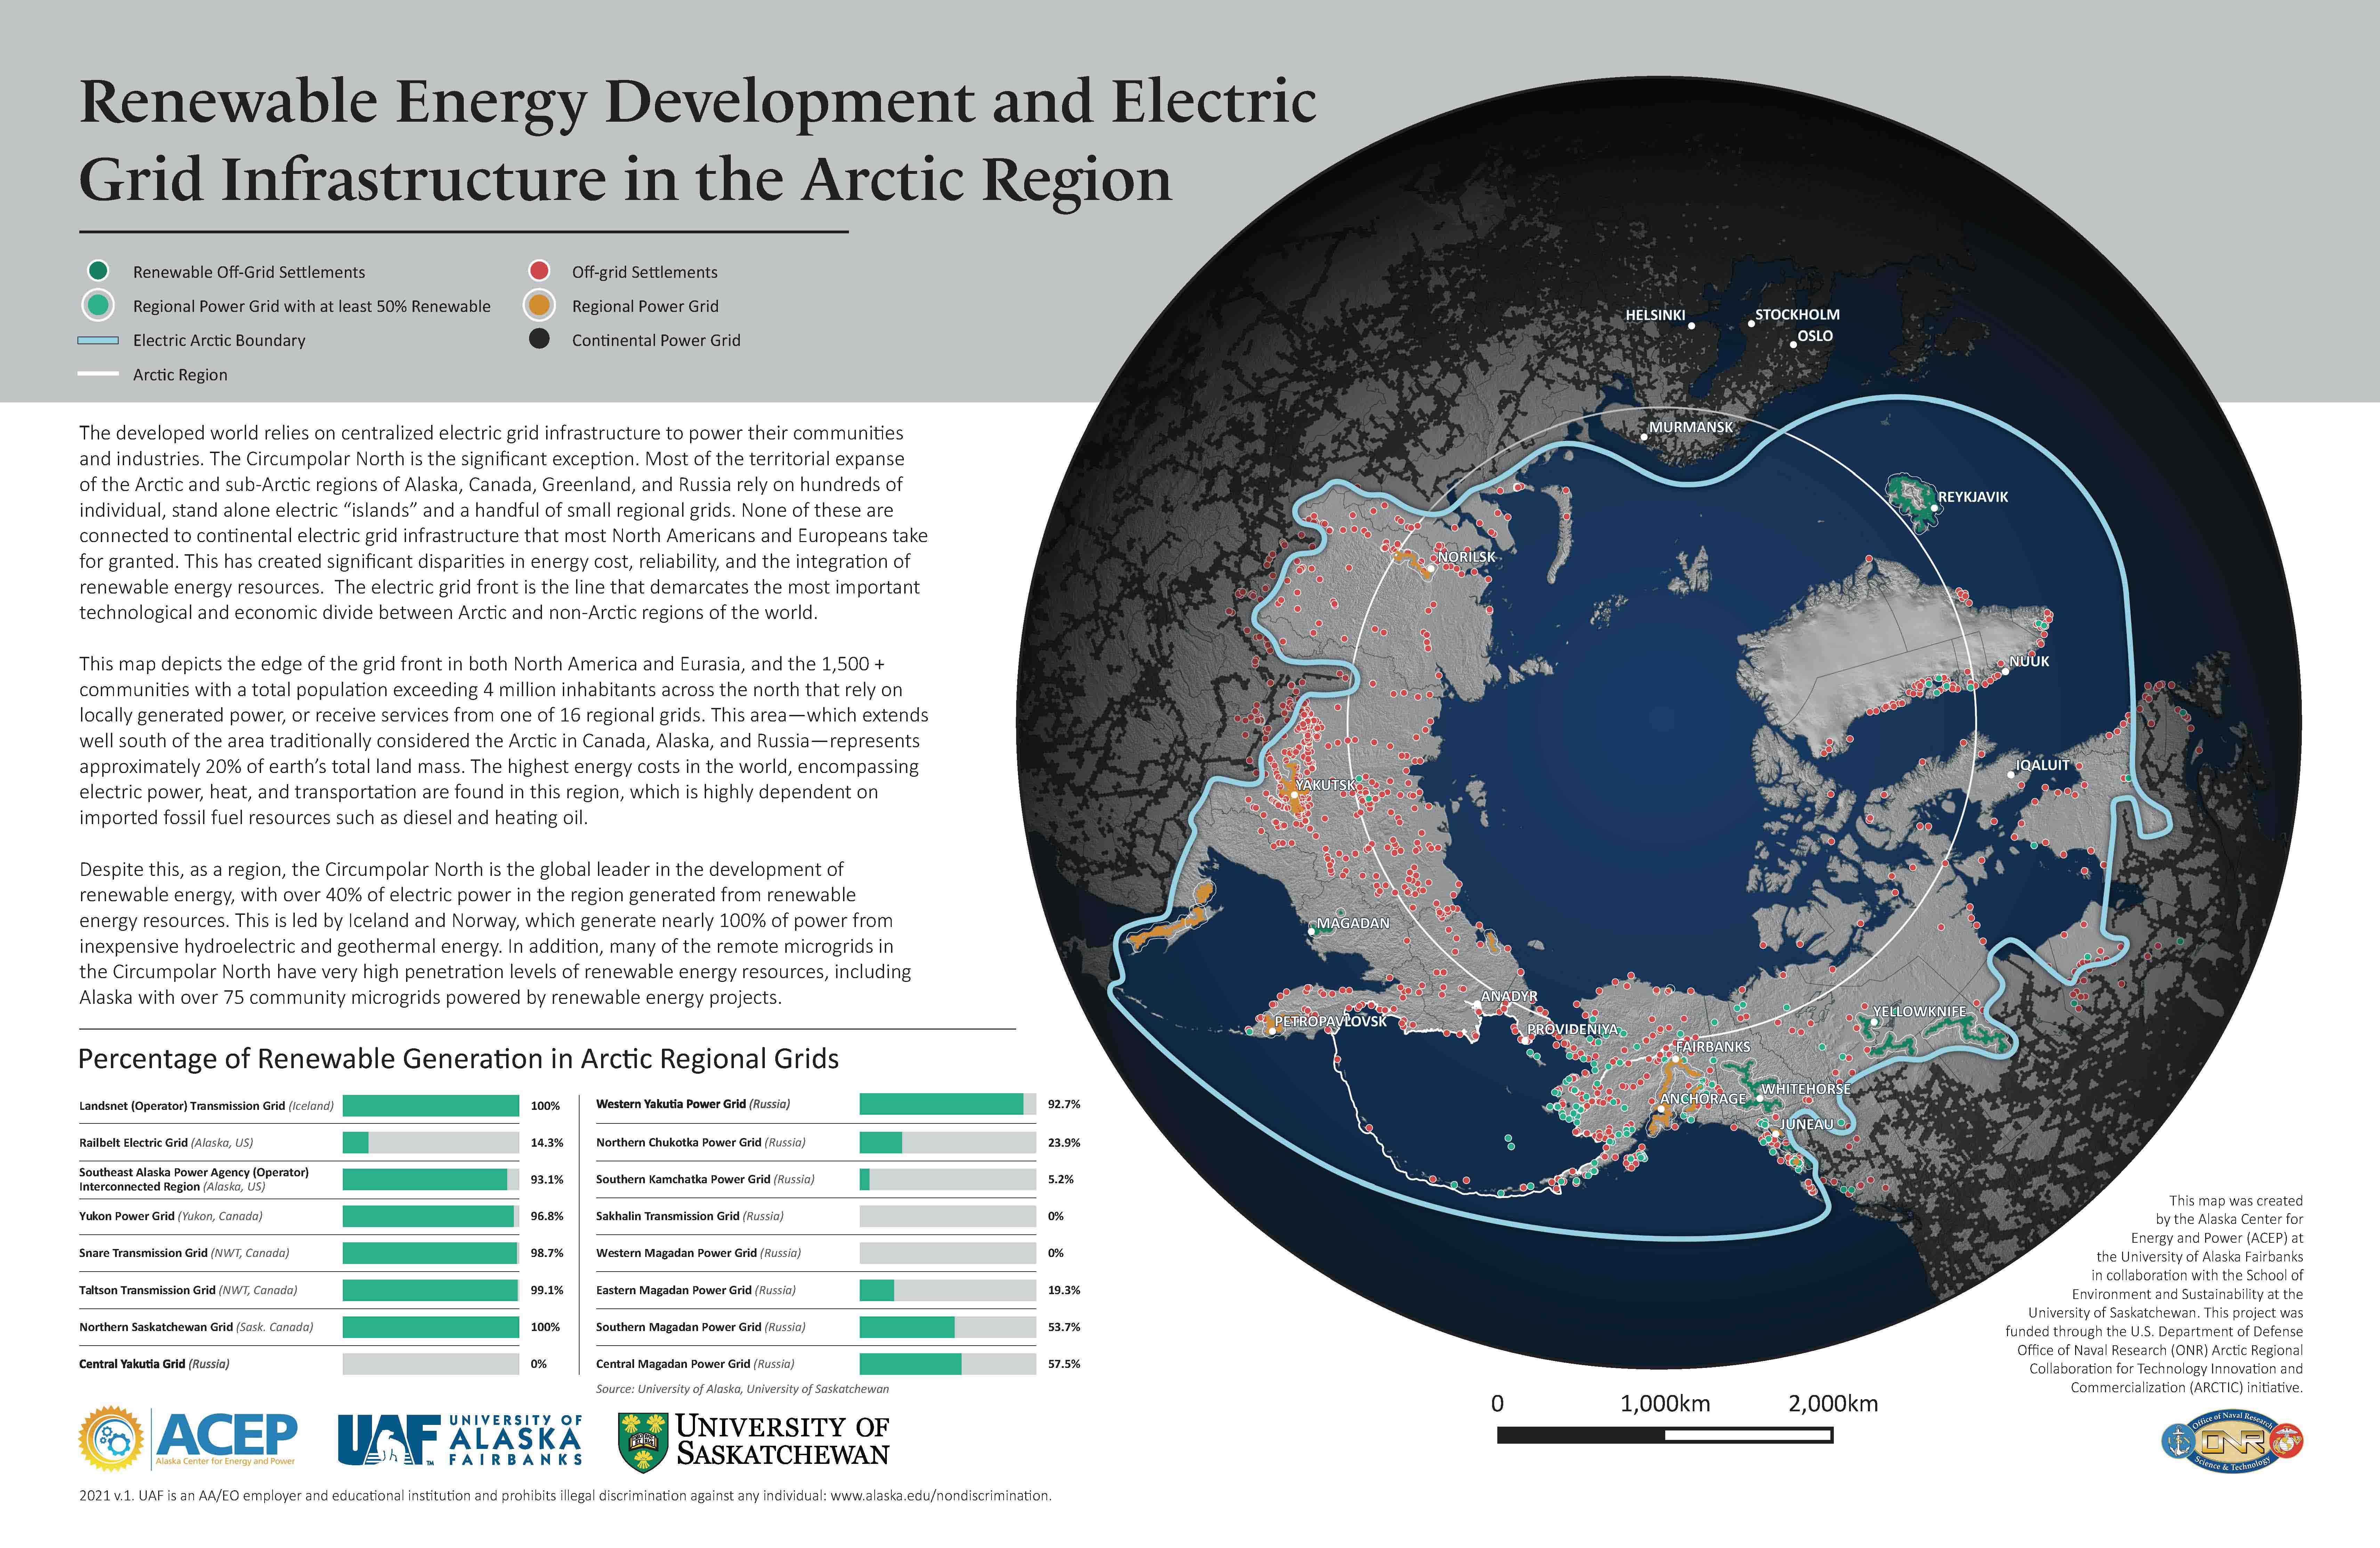 Arctic Energy Atlas Puts All Energy Systems on the Map